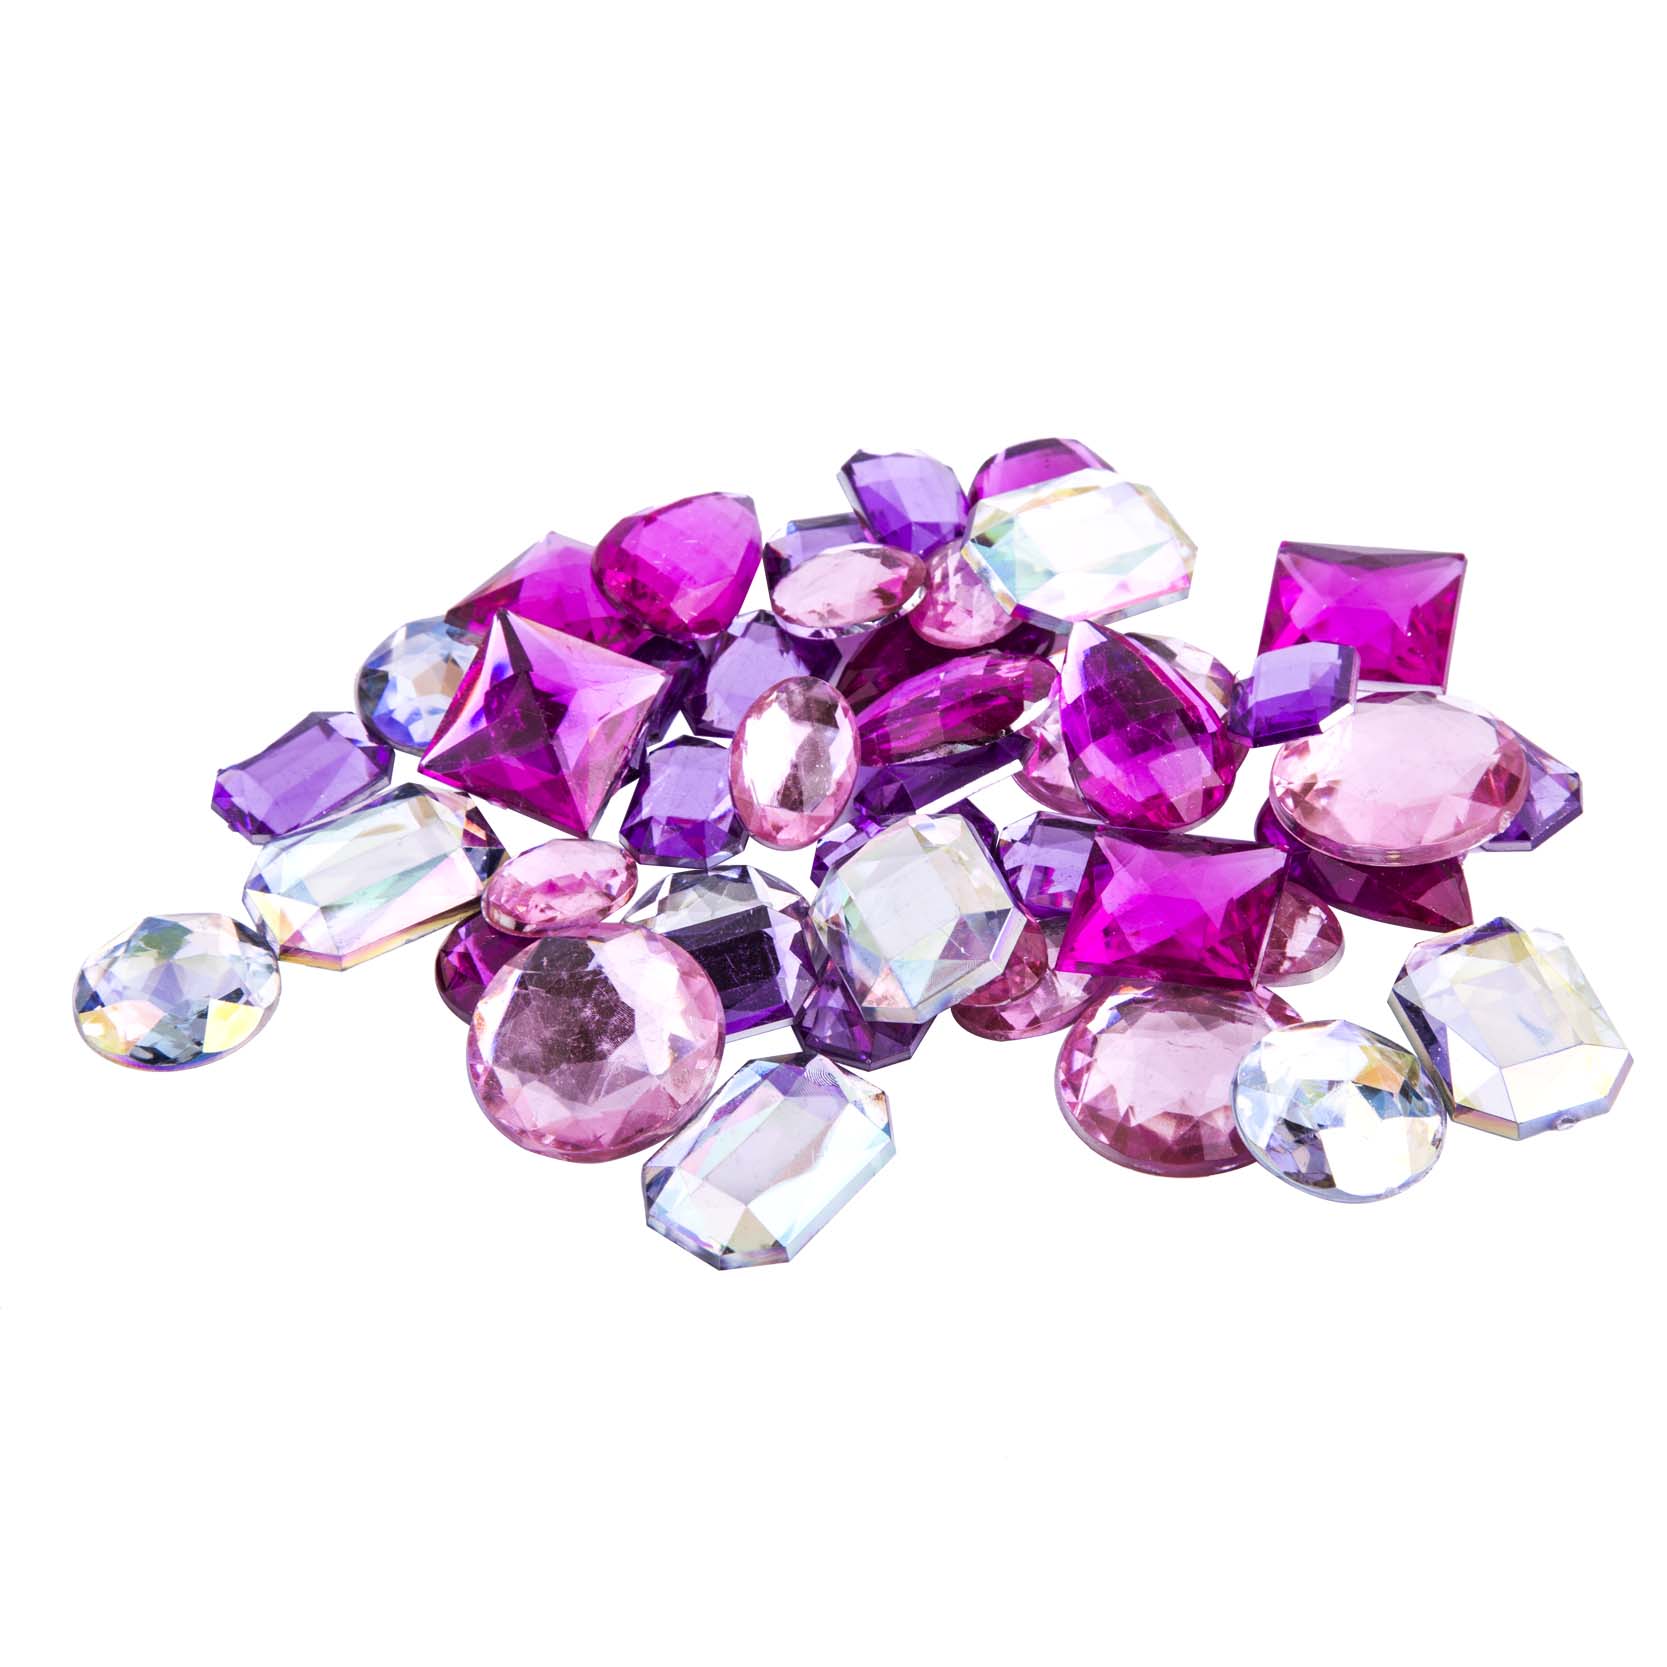 Buy the Pink Gems by Bead Landing™ at Michaels